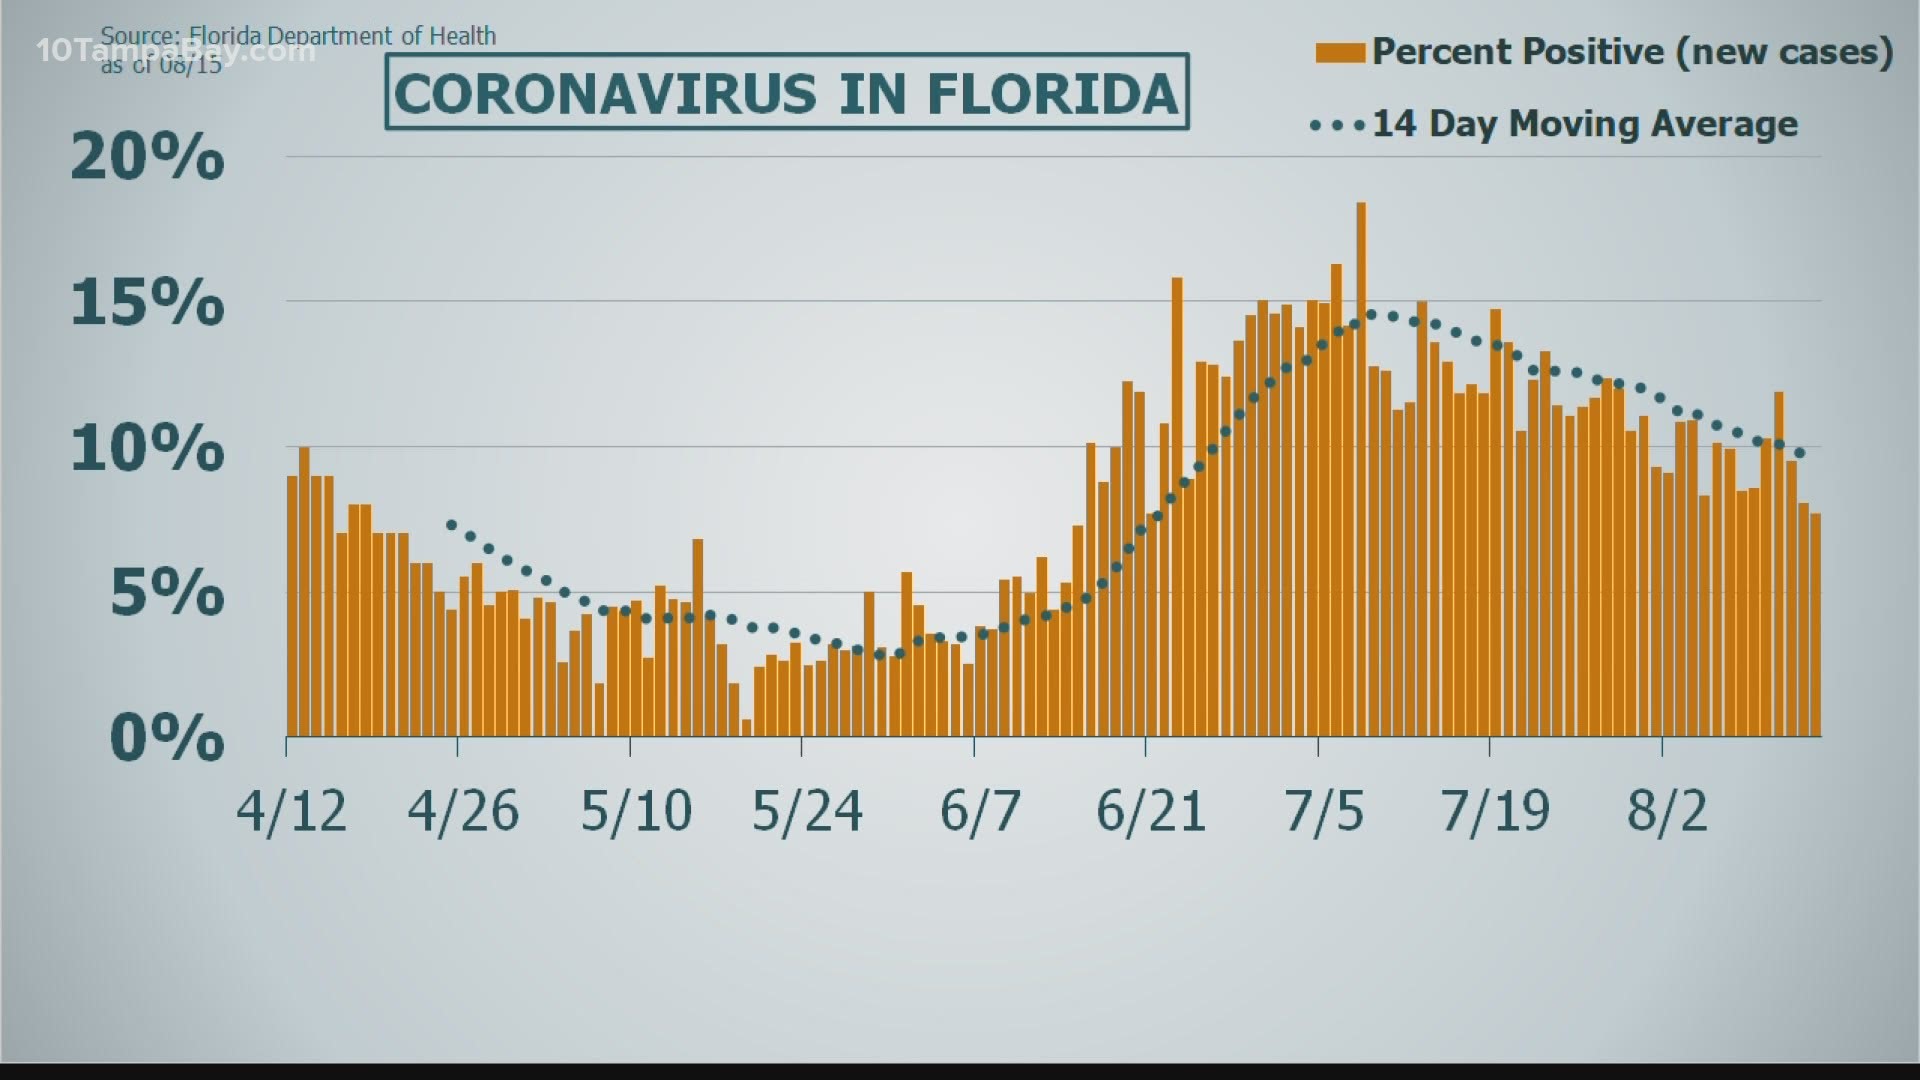 That's the lowest daily positivity rate Florida has seen since late June.